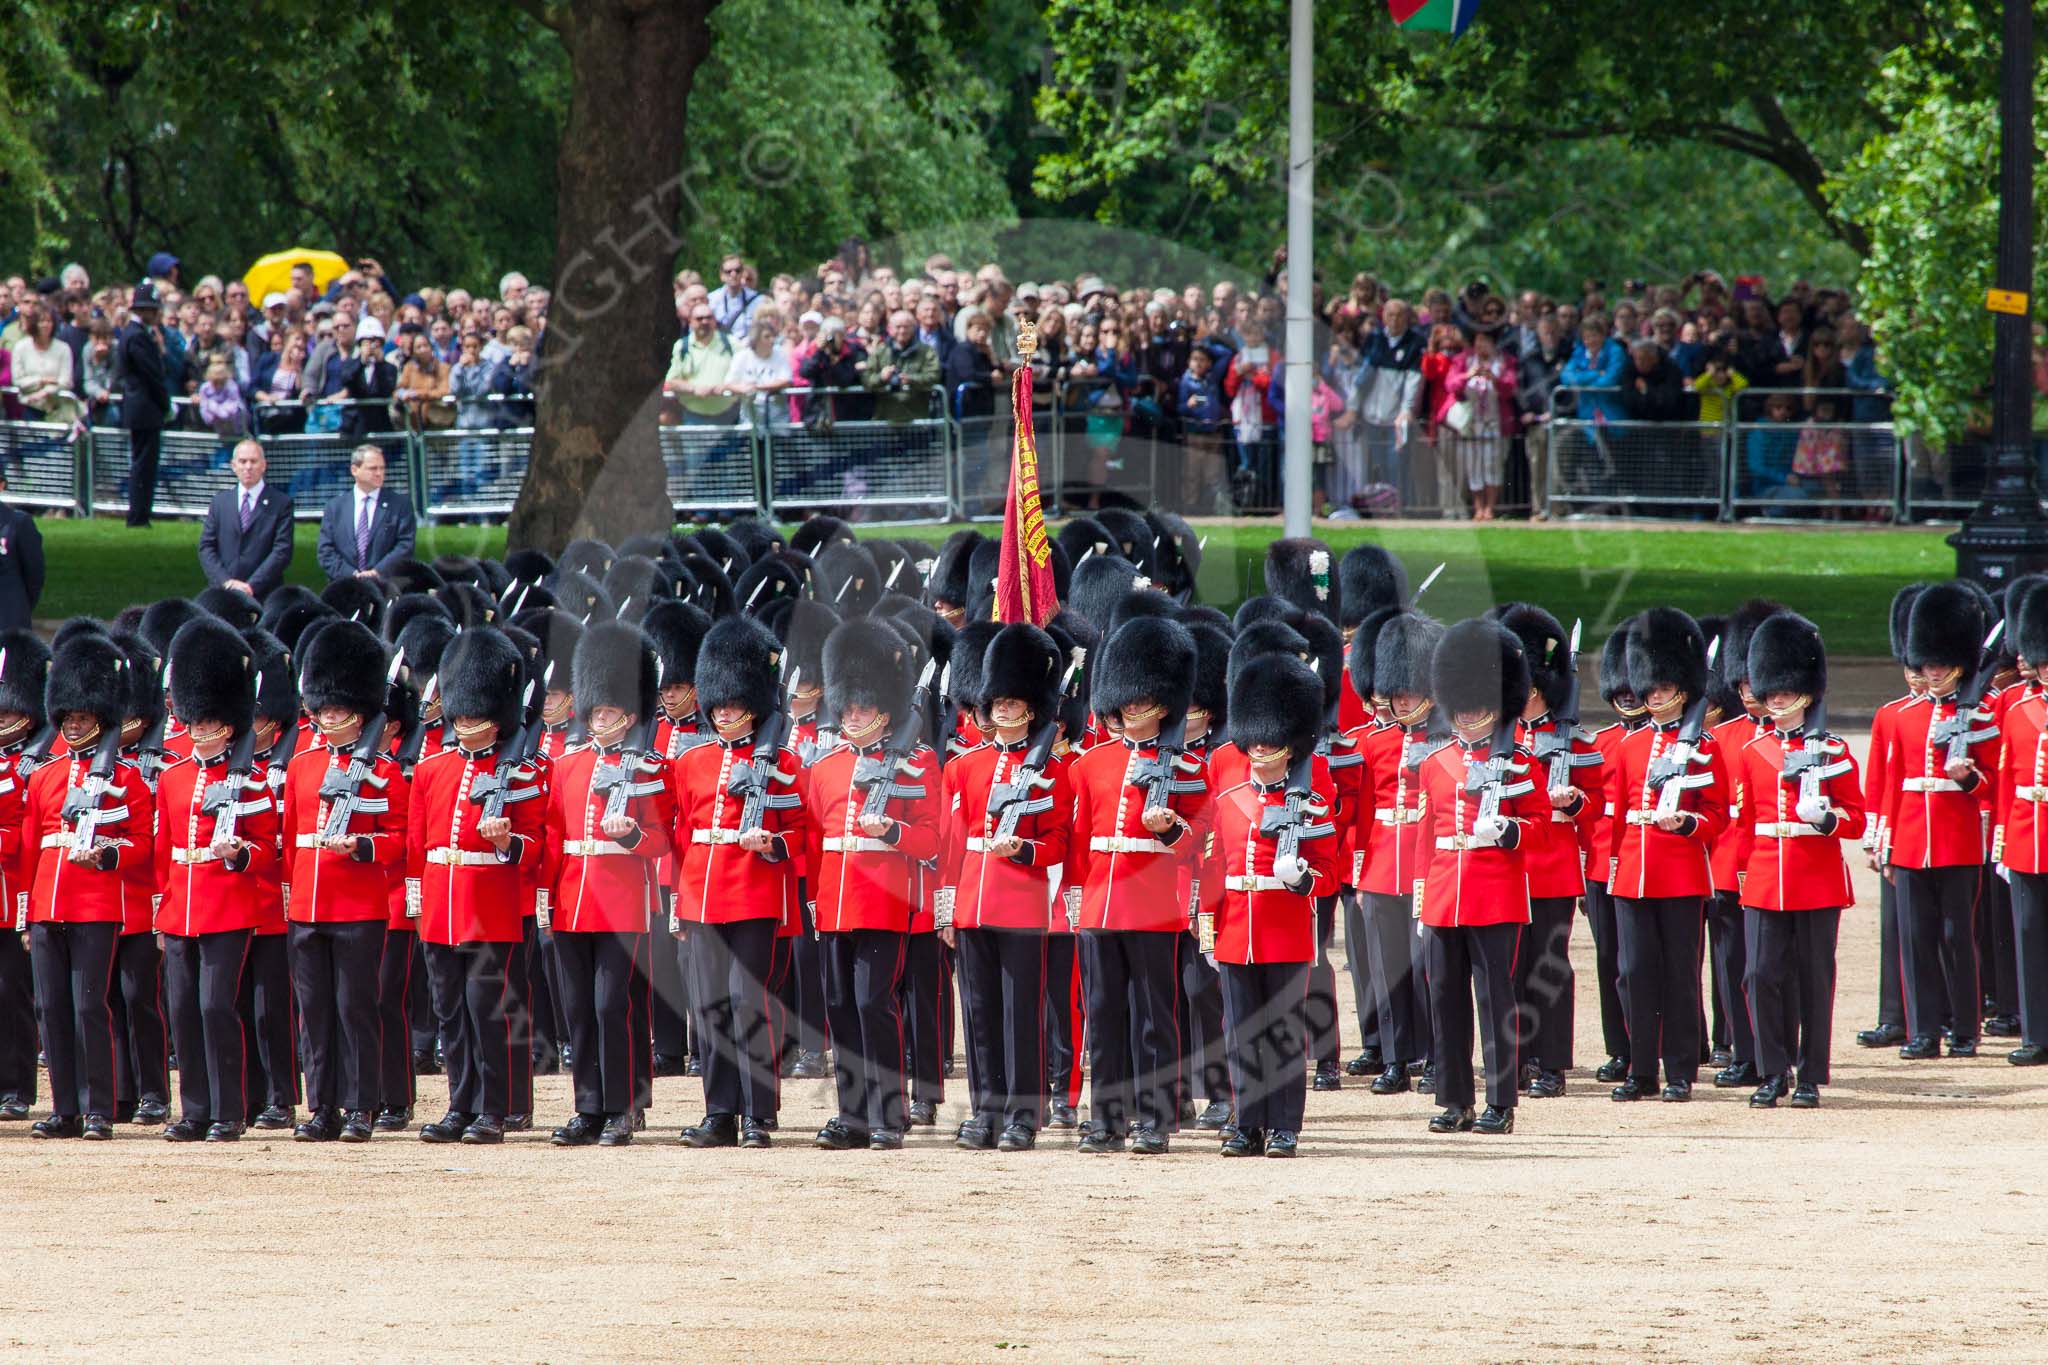 Trooping the Colour 2013: No. 1 Guard (Escort to the Colour),1st Battalion Welsh Guards, at the begin of the March Past. Image #527, 15 June 2013 11:33 Horse Guards Parade, London, UK